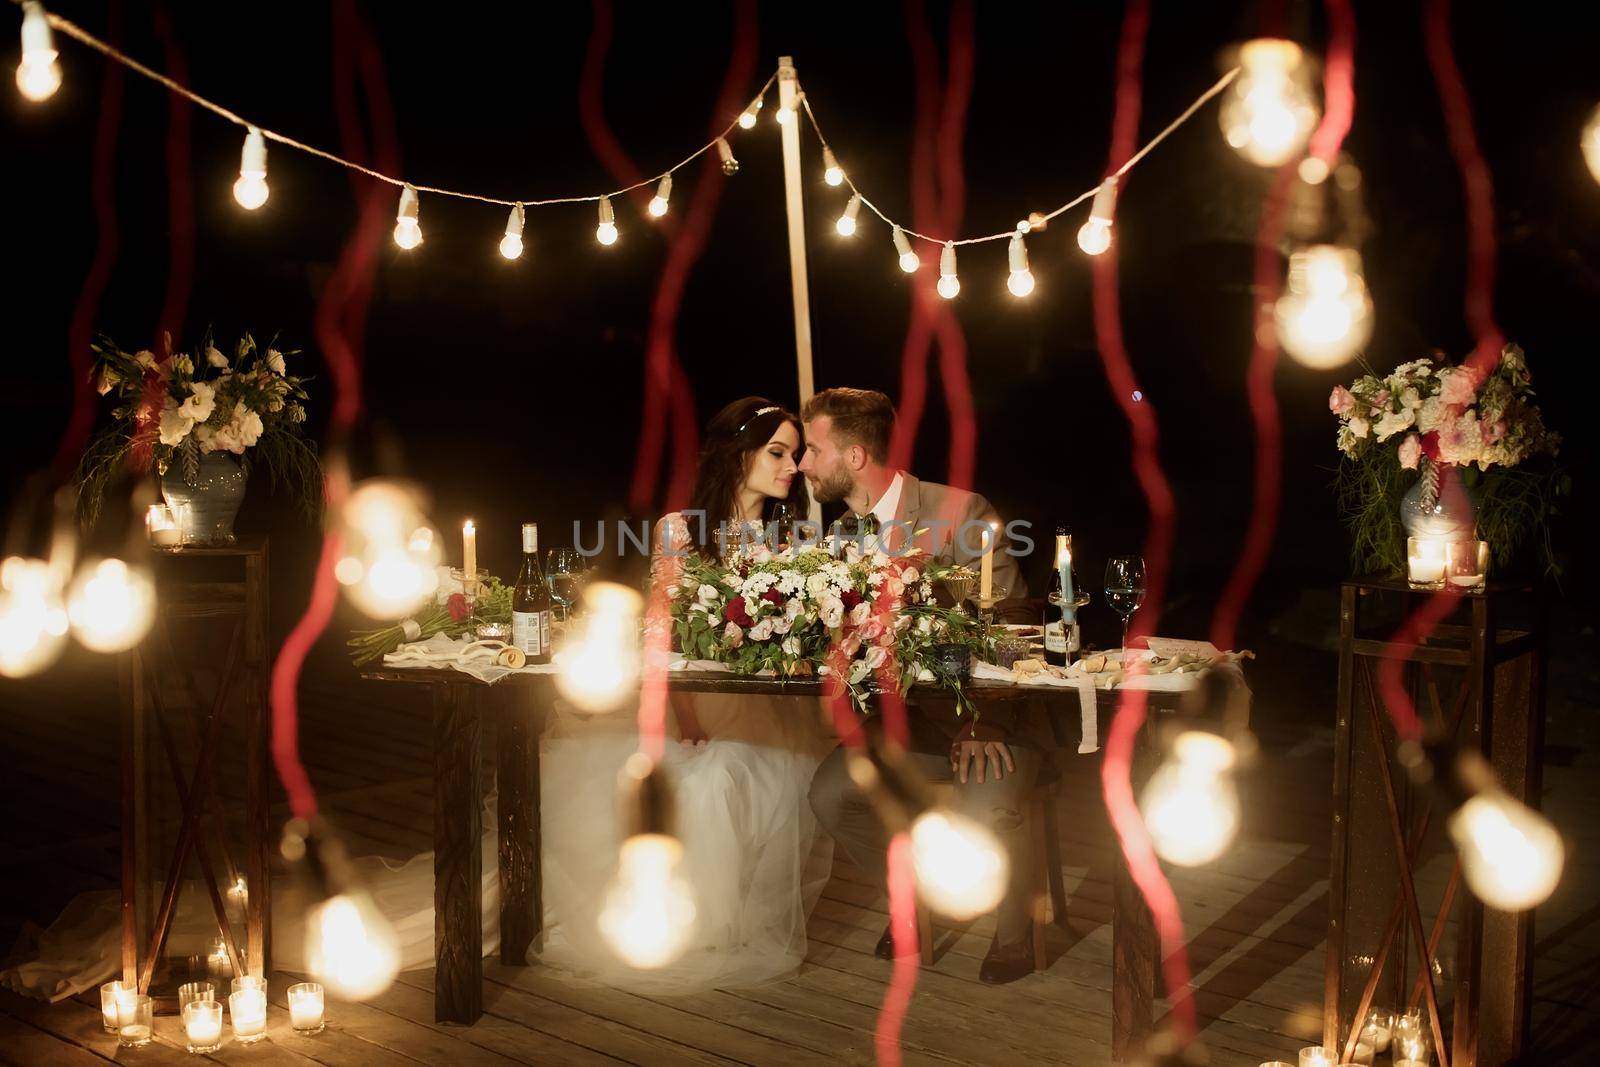 The night wedding ceremony. The bride and groom are sitting at the festive table. Banquet